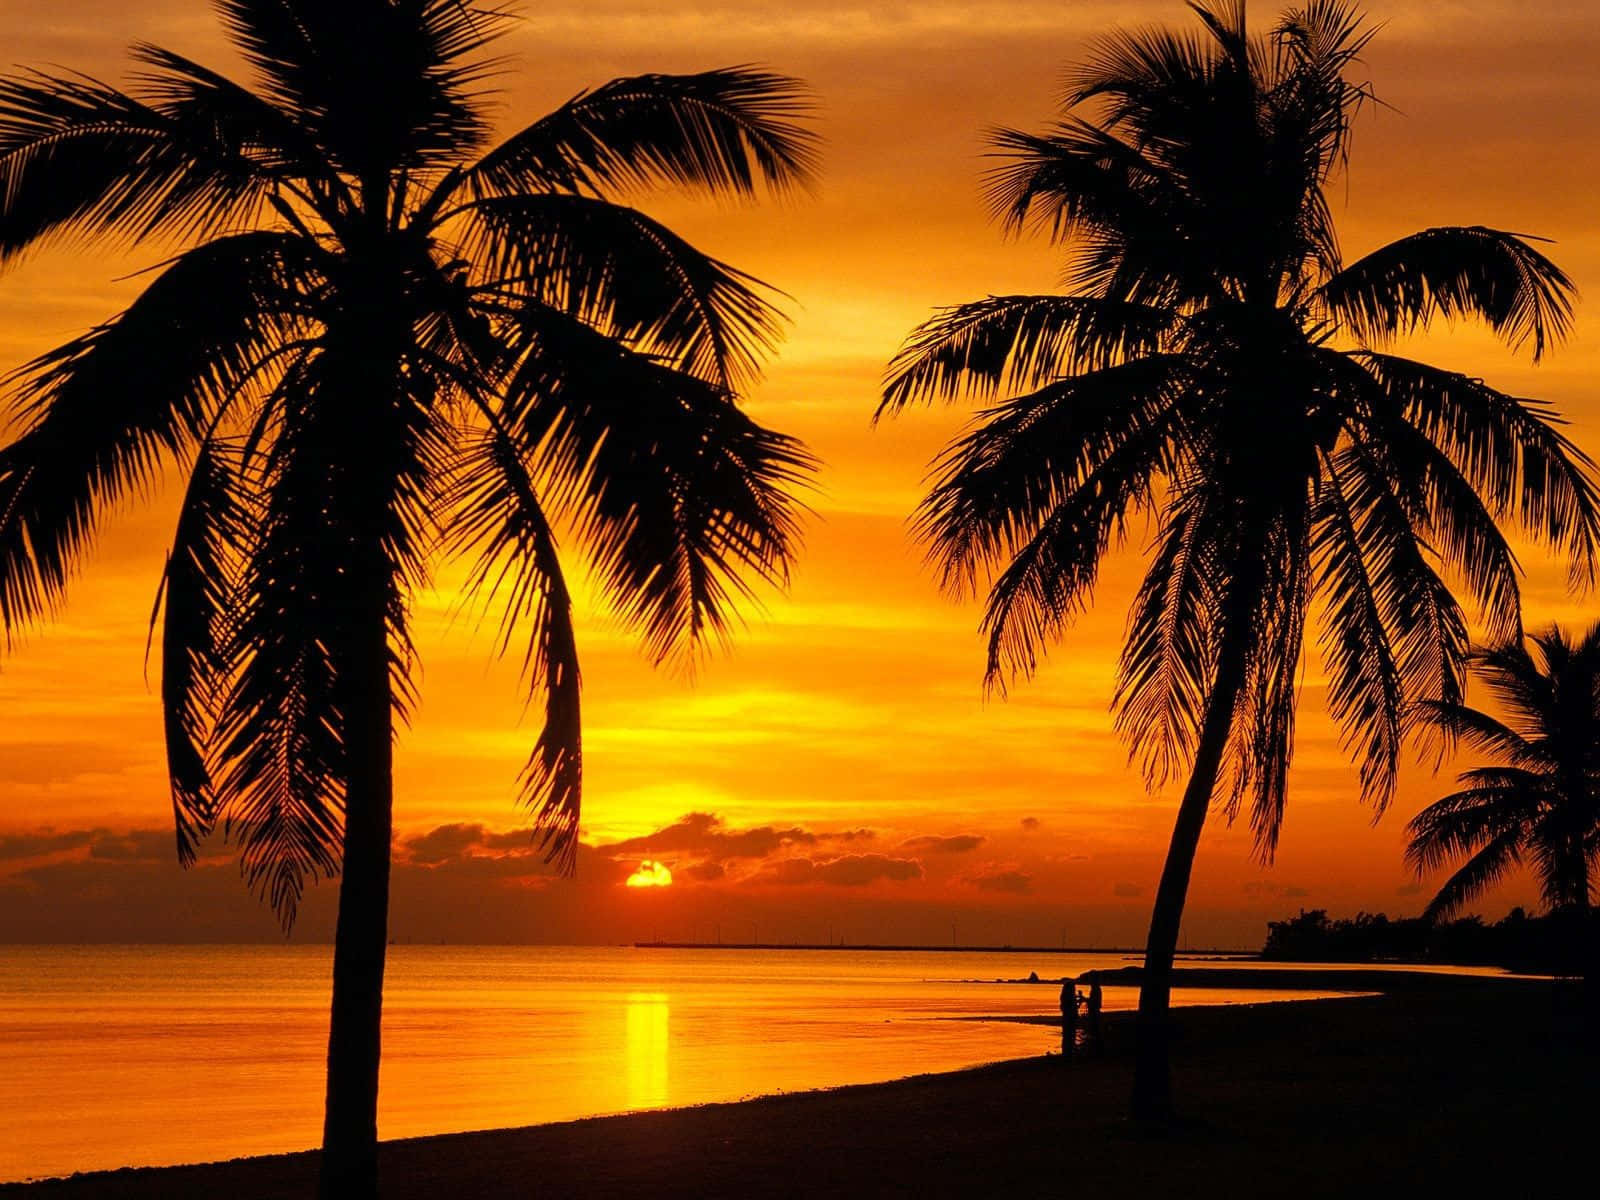 Download #_Sunset_View: Serene Beach and Palm Trees at Dusk_# Wallpaper ...